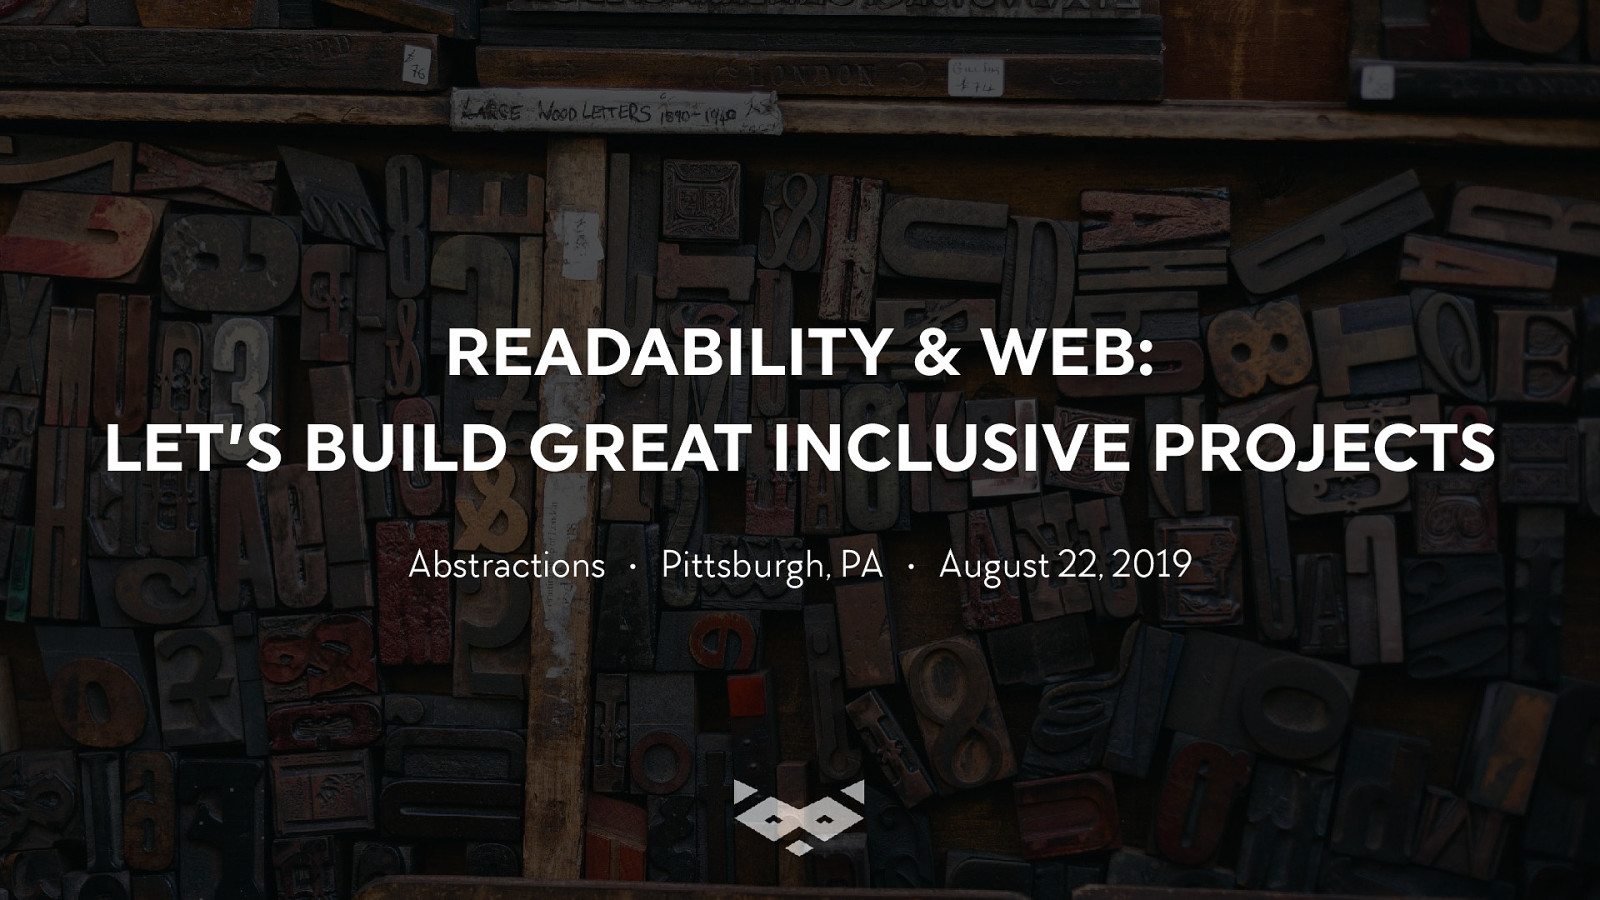 Readability & Web: Let’s build great inclusive projects